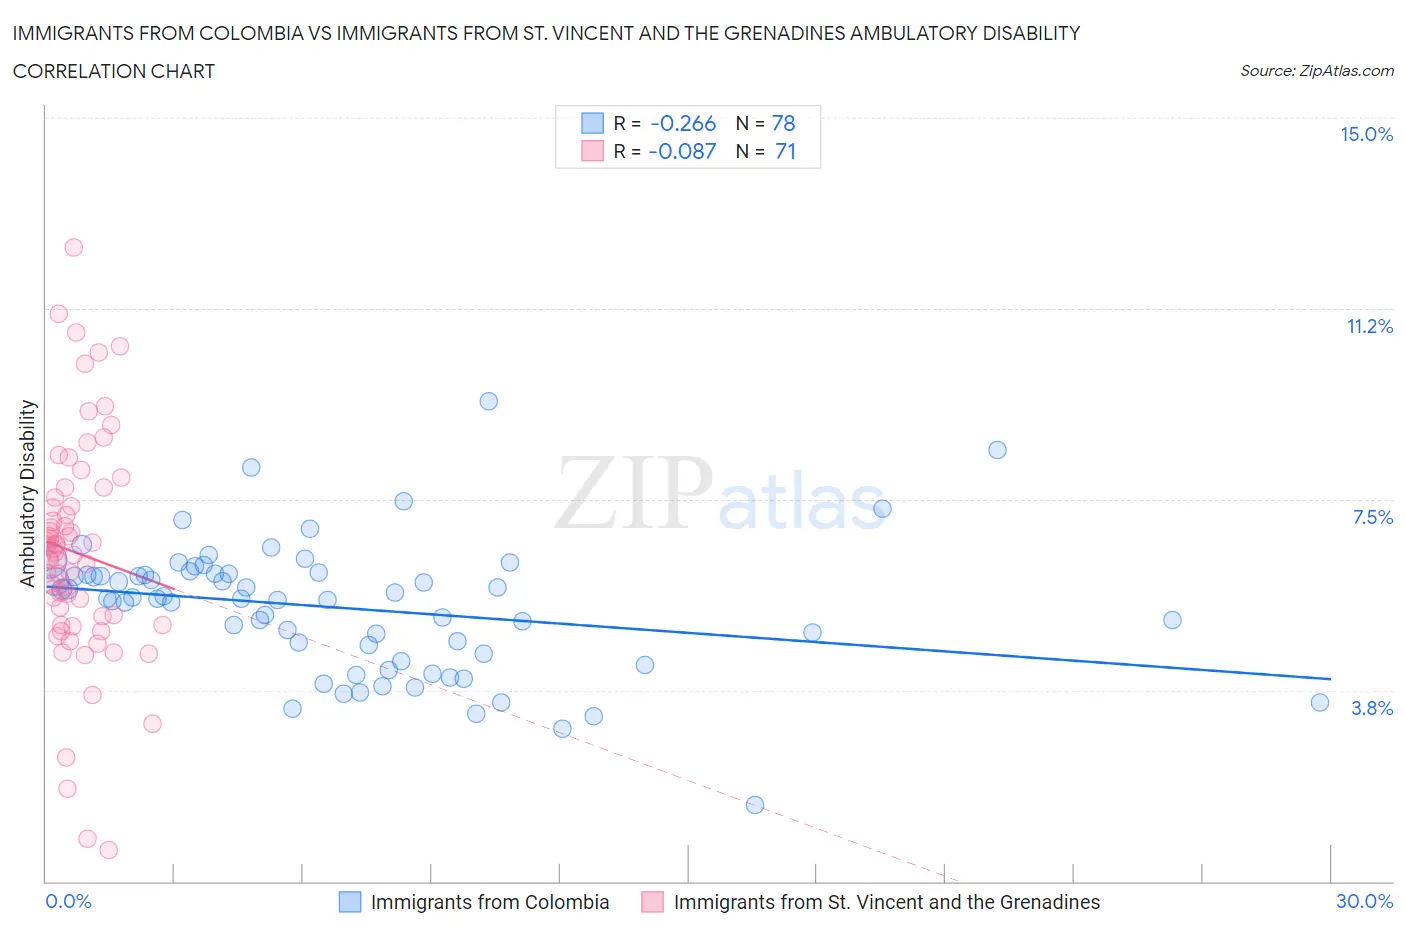 Immigrants from Colombia vs Immigrants from St. Vincent and the Grenadines Ambulatory Disability